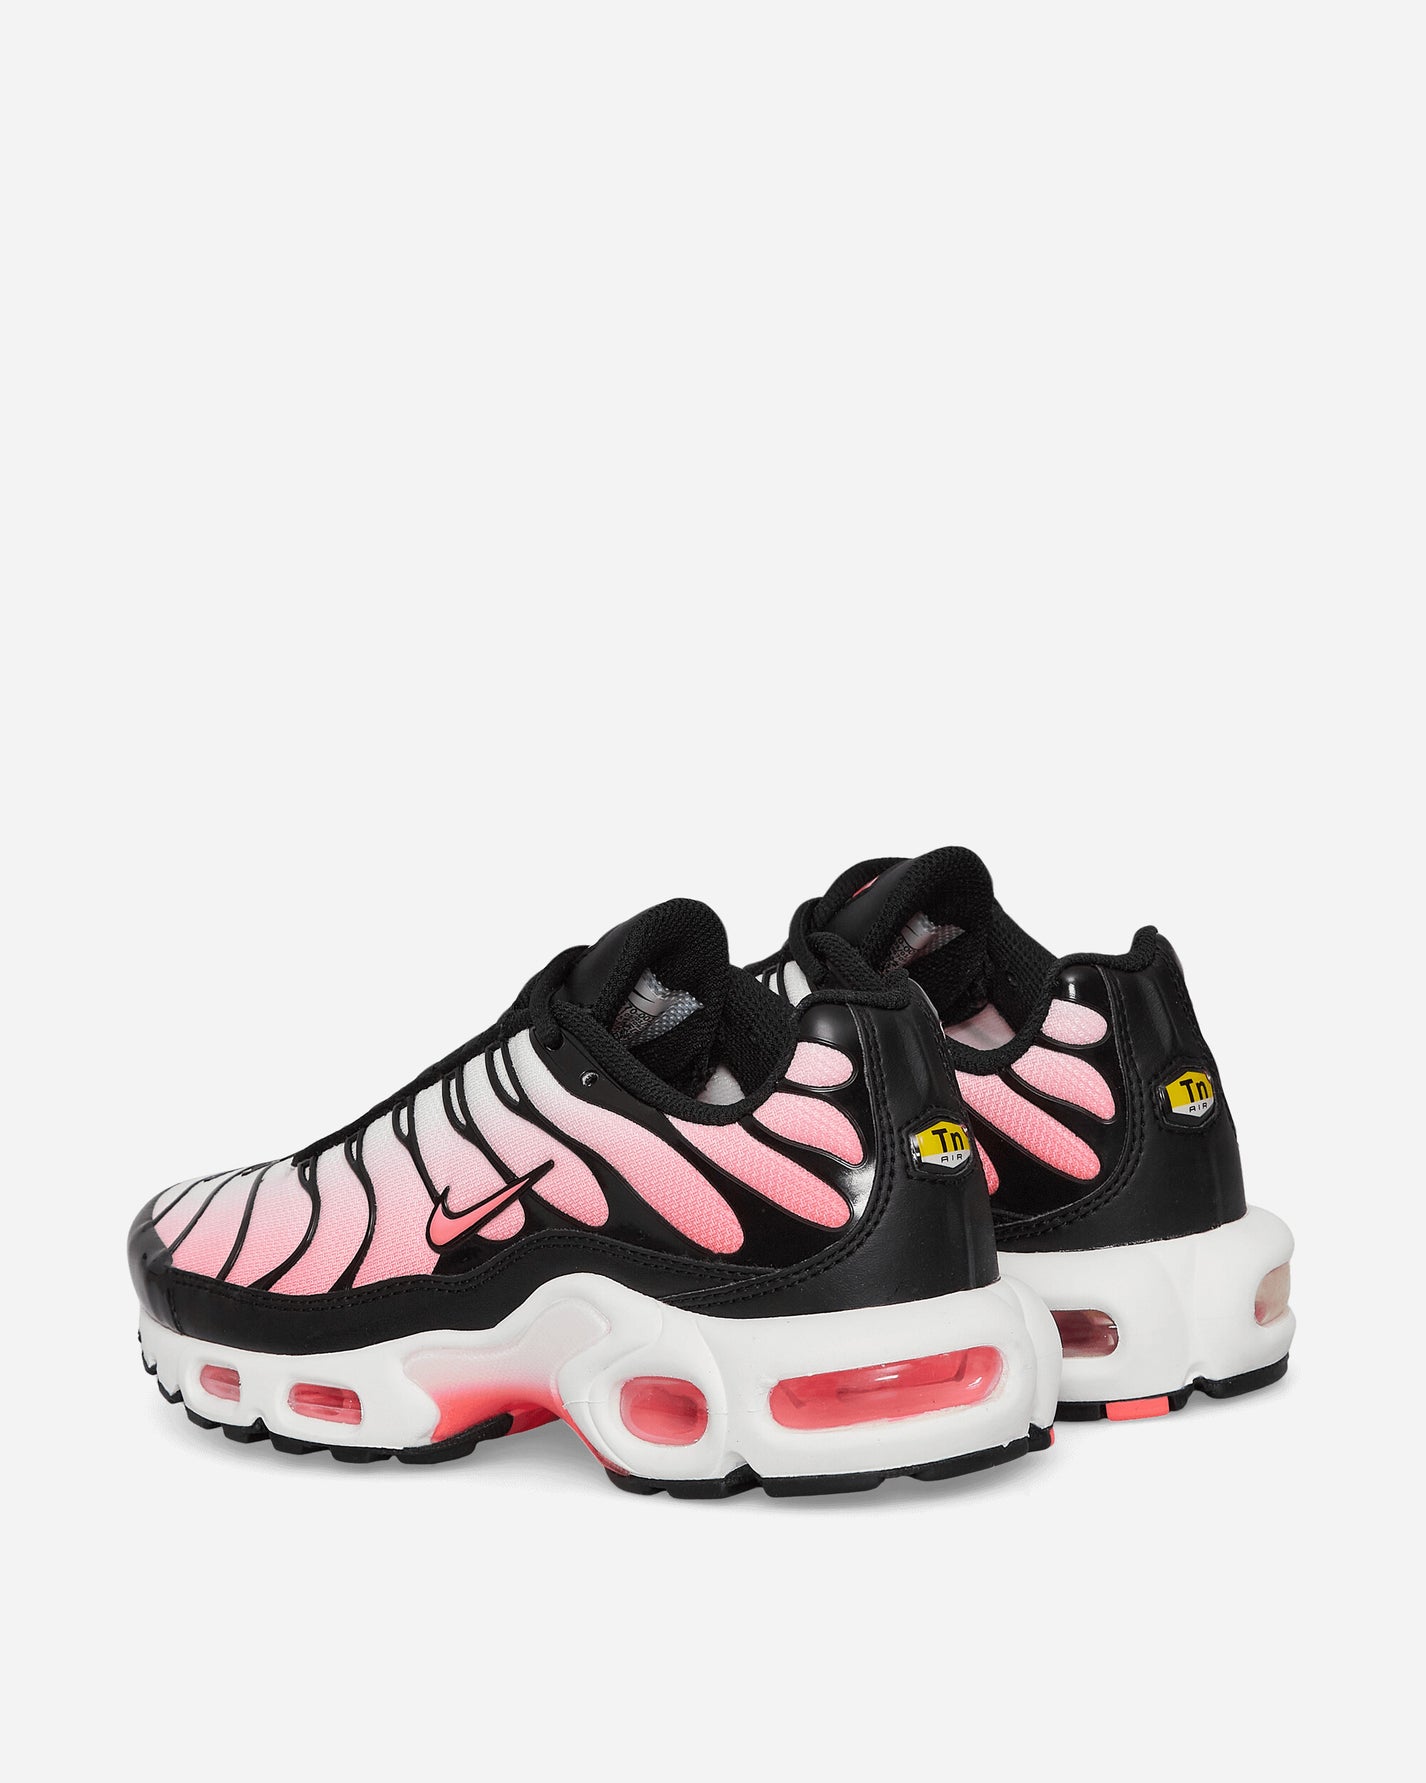 Nike Wmns W Air Max Plus Black/Hot Punch Sneakers Mid DZ3670-002